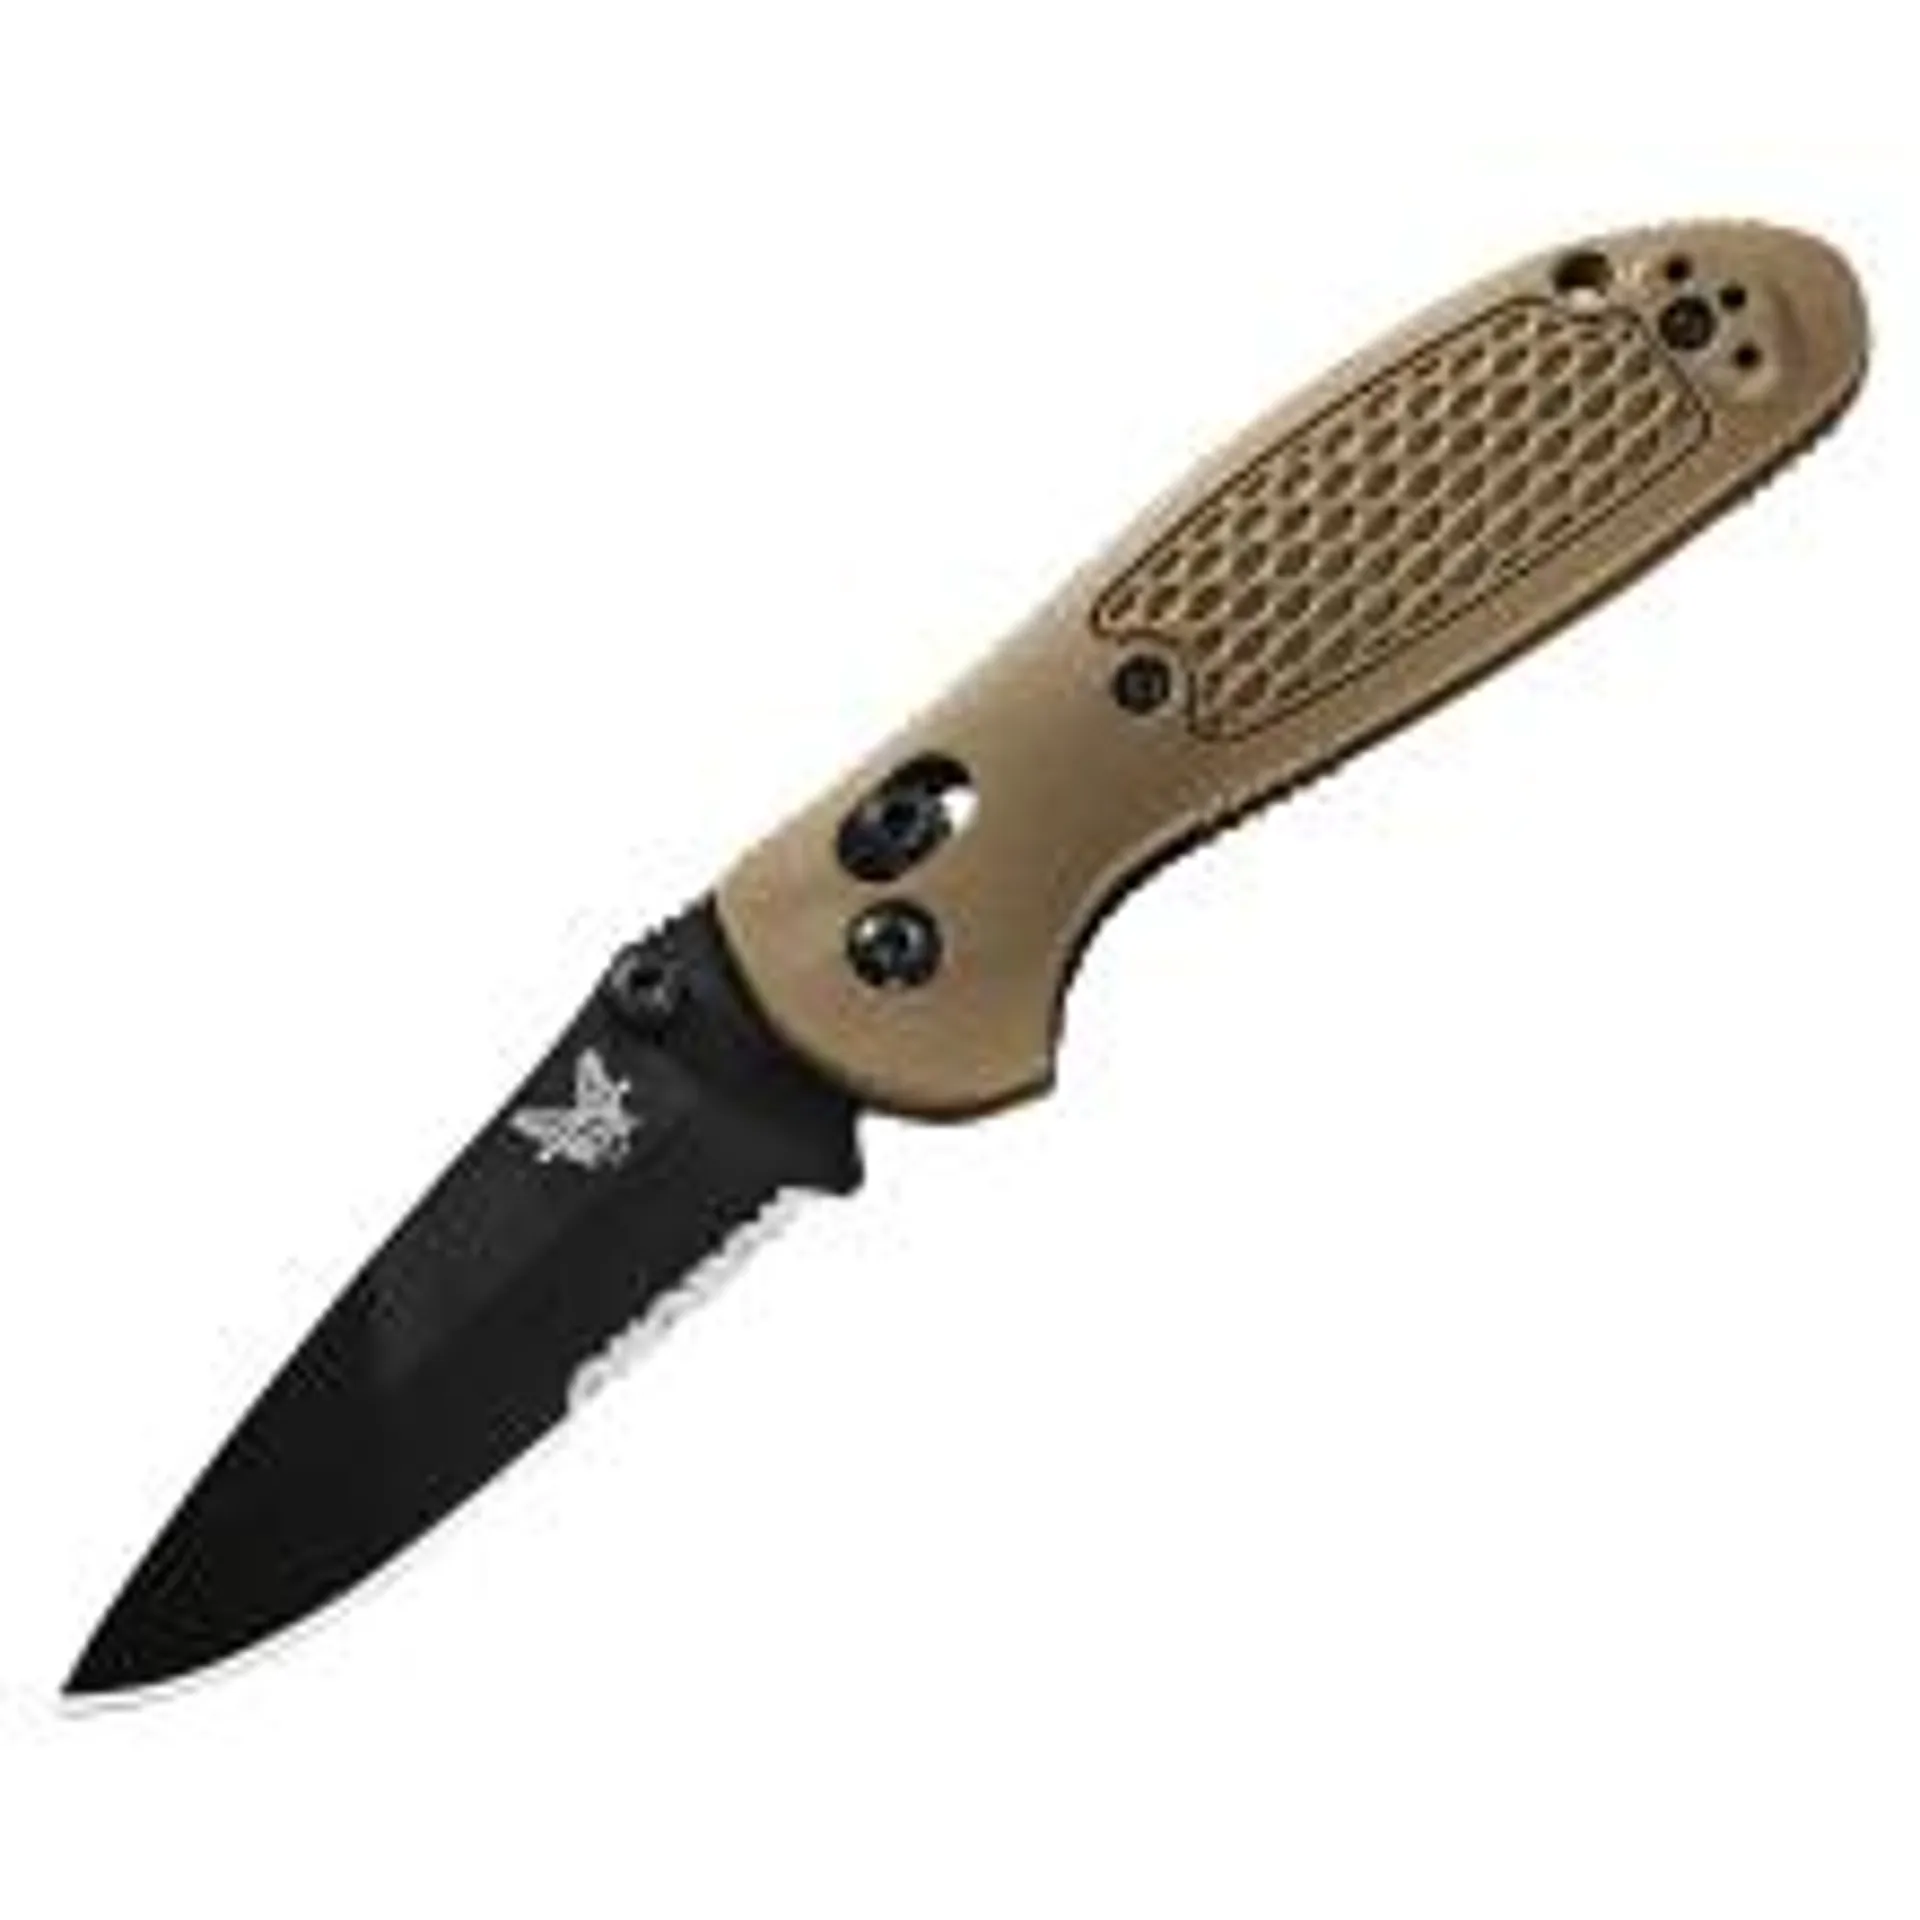 Benchmade Griptilian Folding Knife in Coyote Tan with Serrated D2 Blade